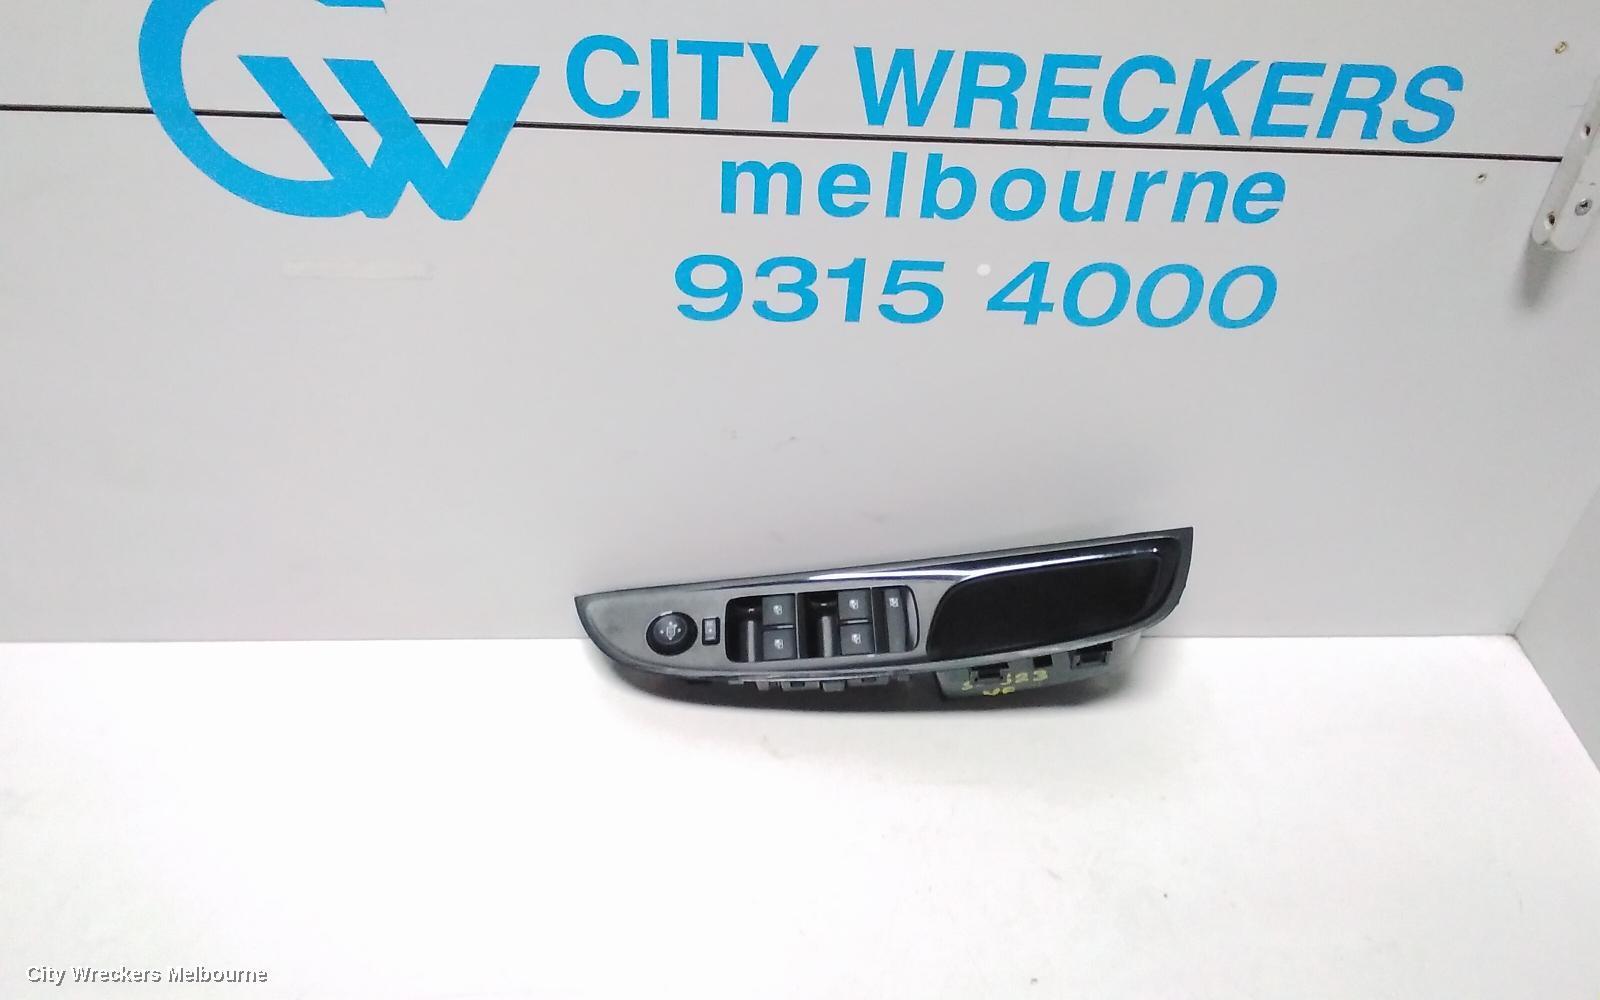 HOLDEN COMMODORE 2014 Pwr Dr Wind Switch